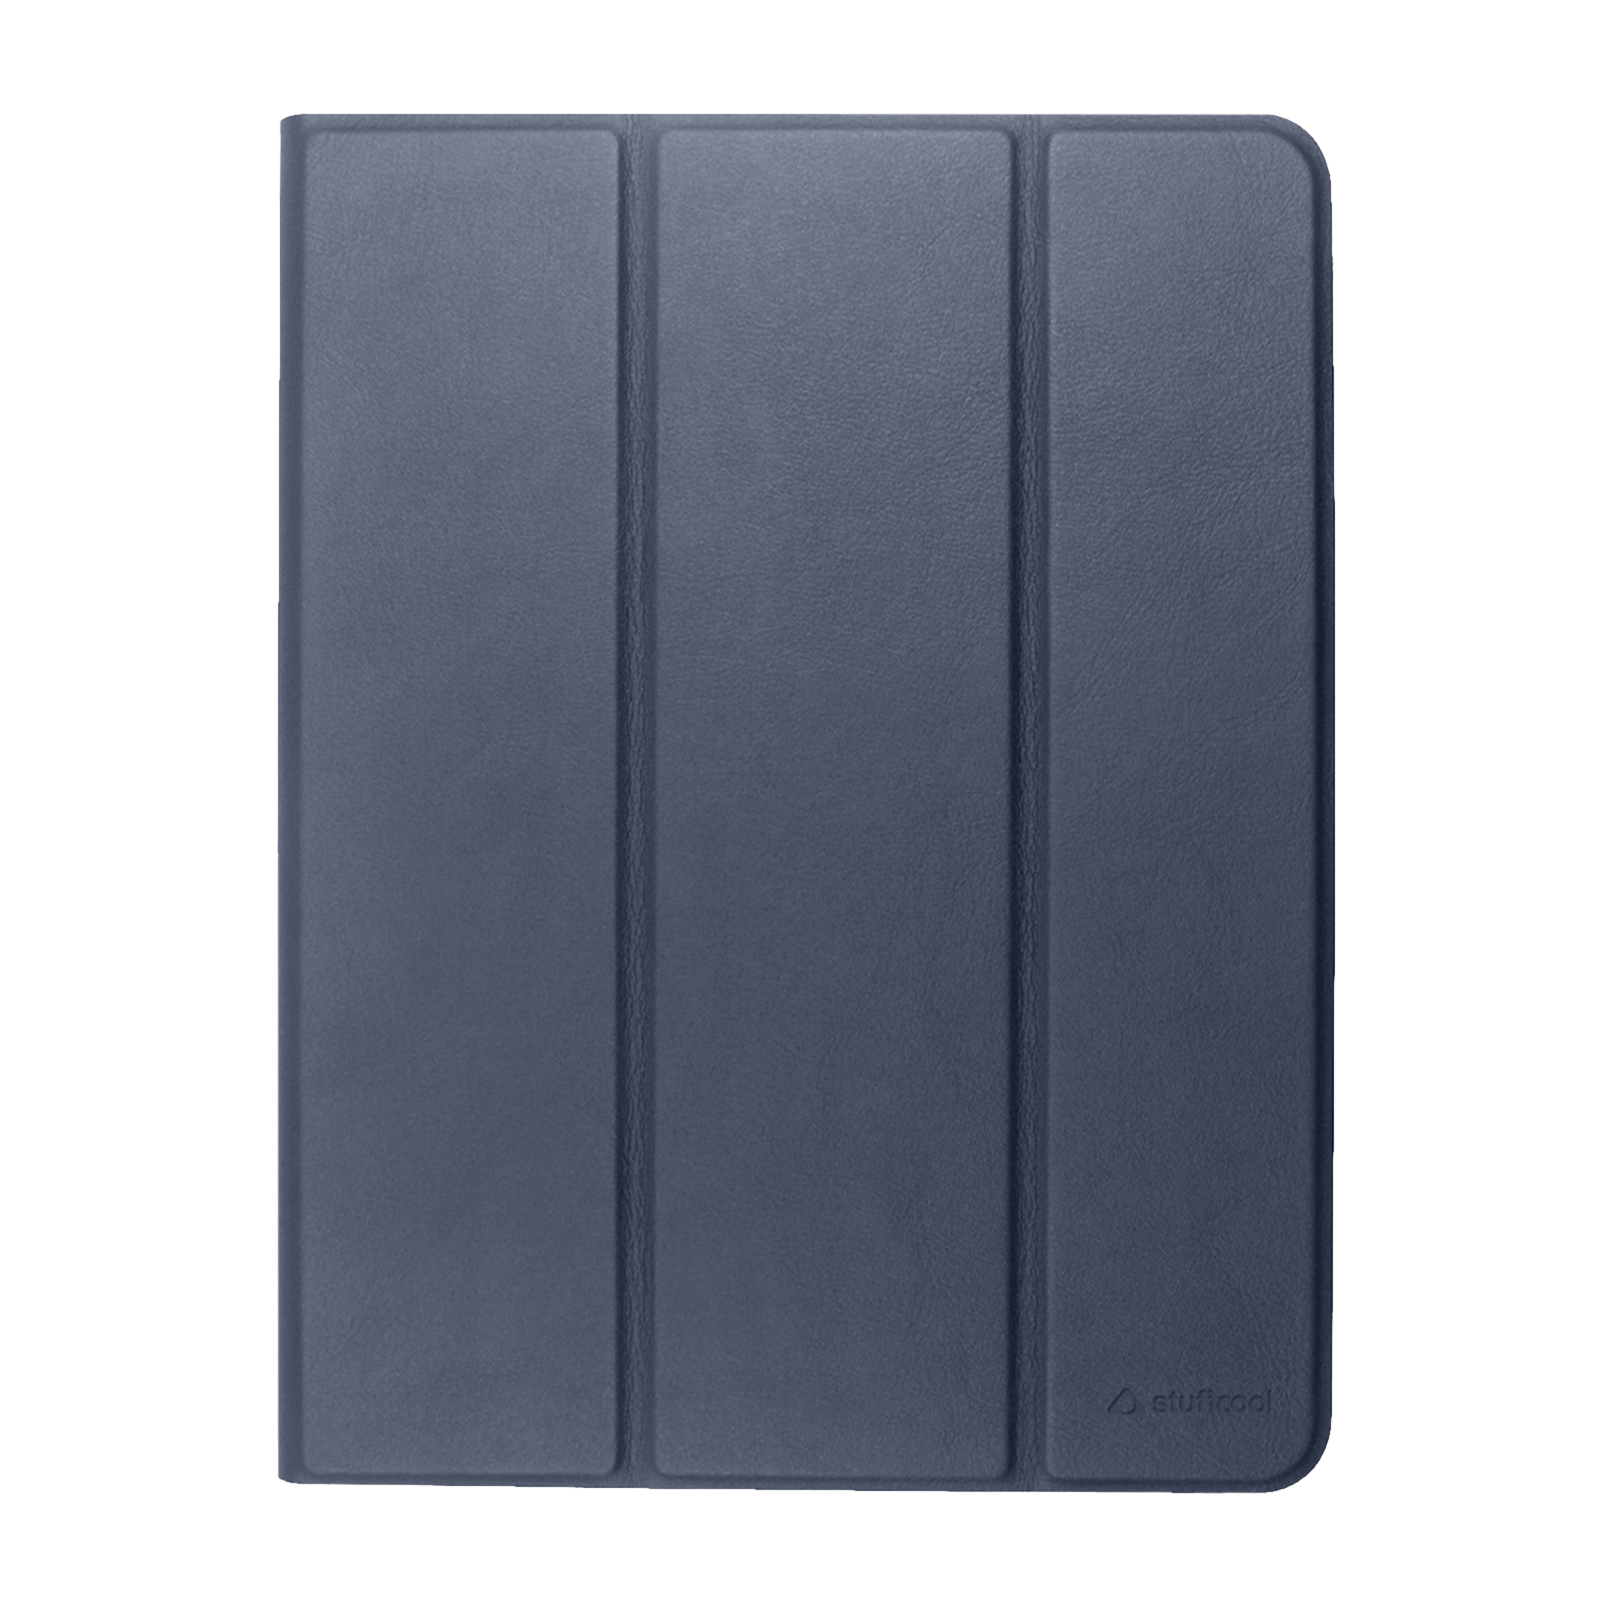 Stuffcool Flex Faux Leather Flip Cover for Apple iPad 10.2 Inch (9th Gen) (Built-in Pencil Holder, Navy)